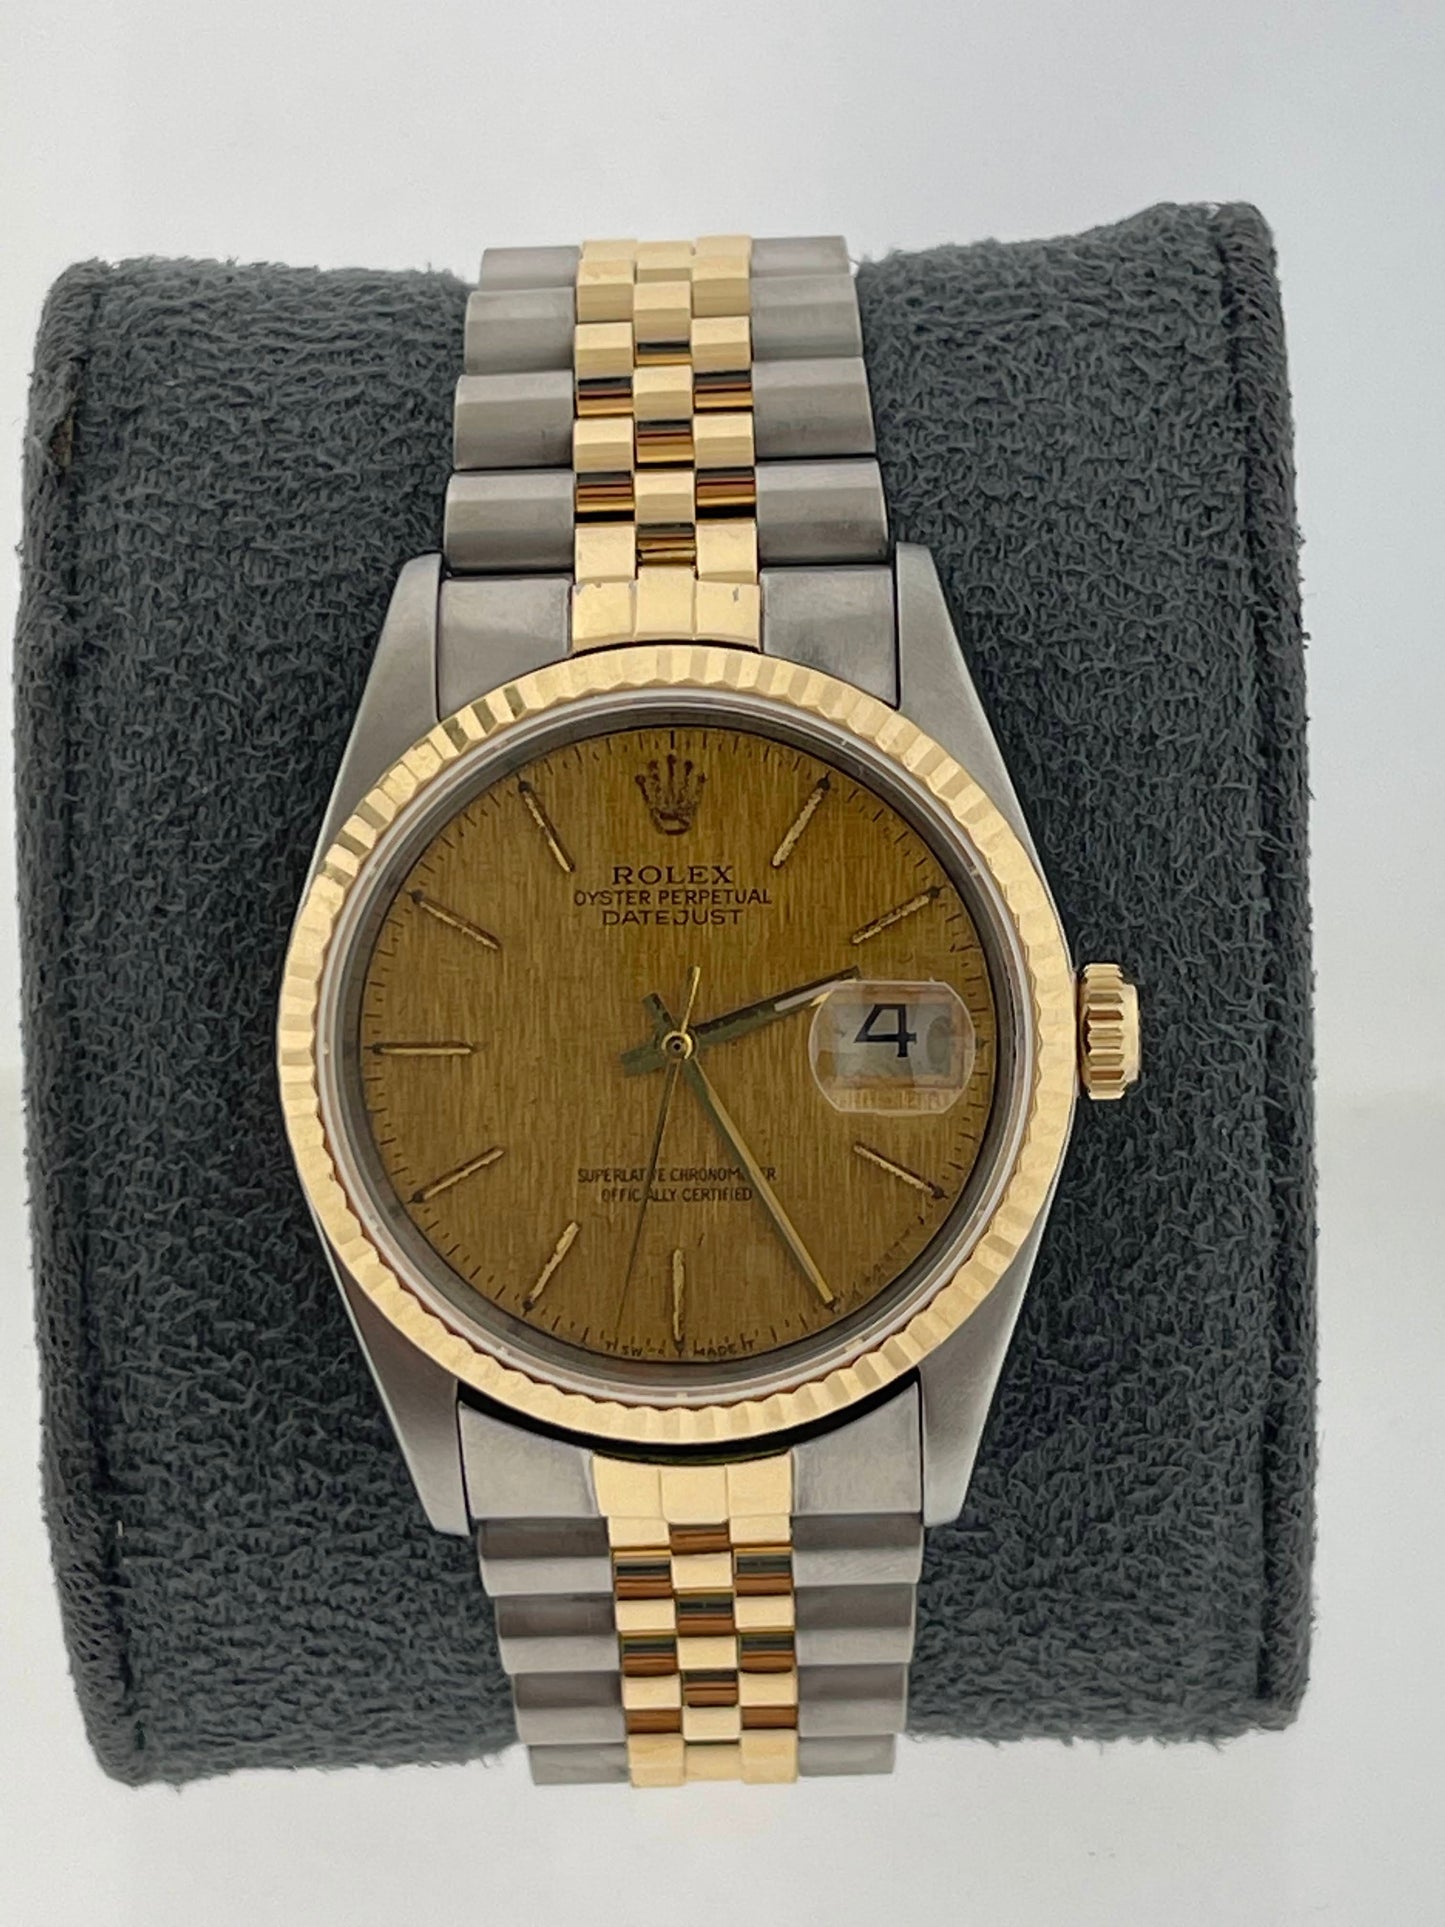 1991 Rolex Datejust 16233 Champagne Textured Dial No Papers 36mm